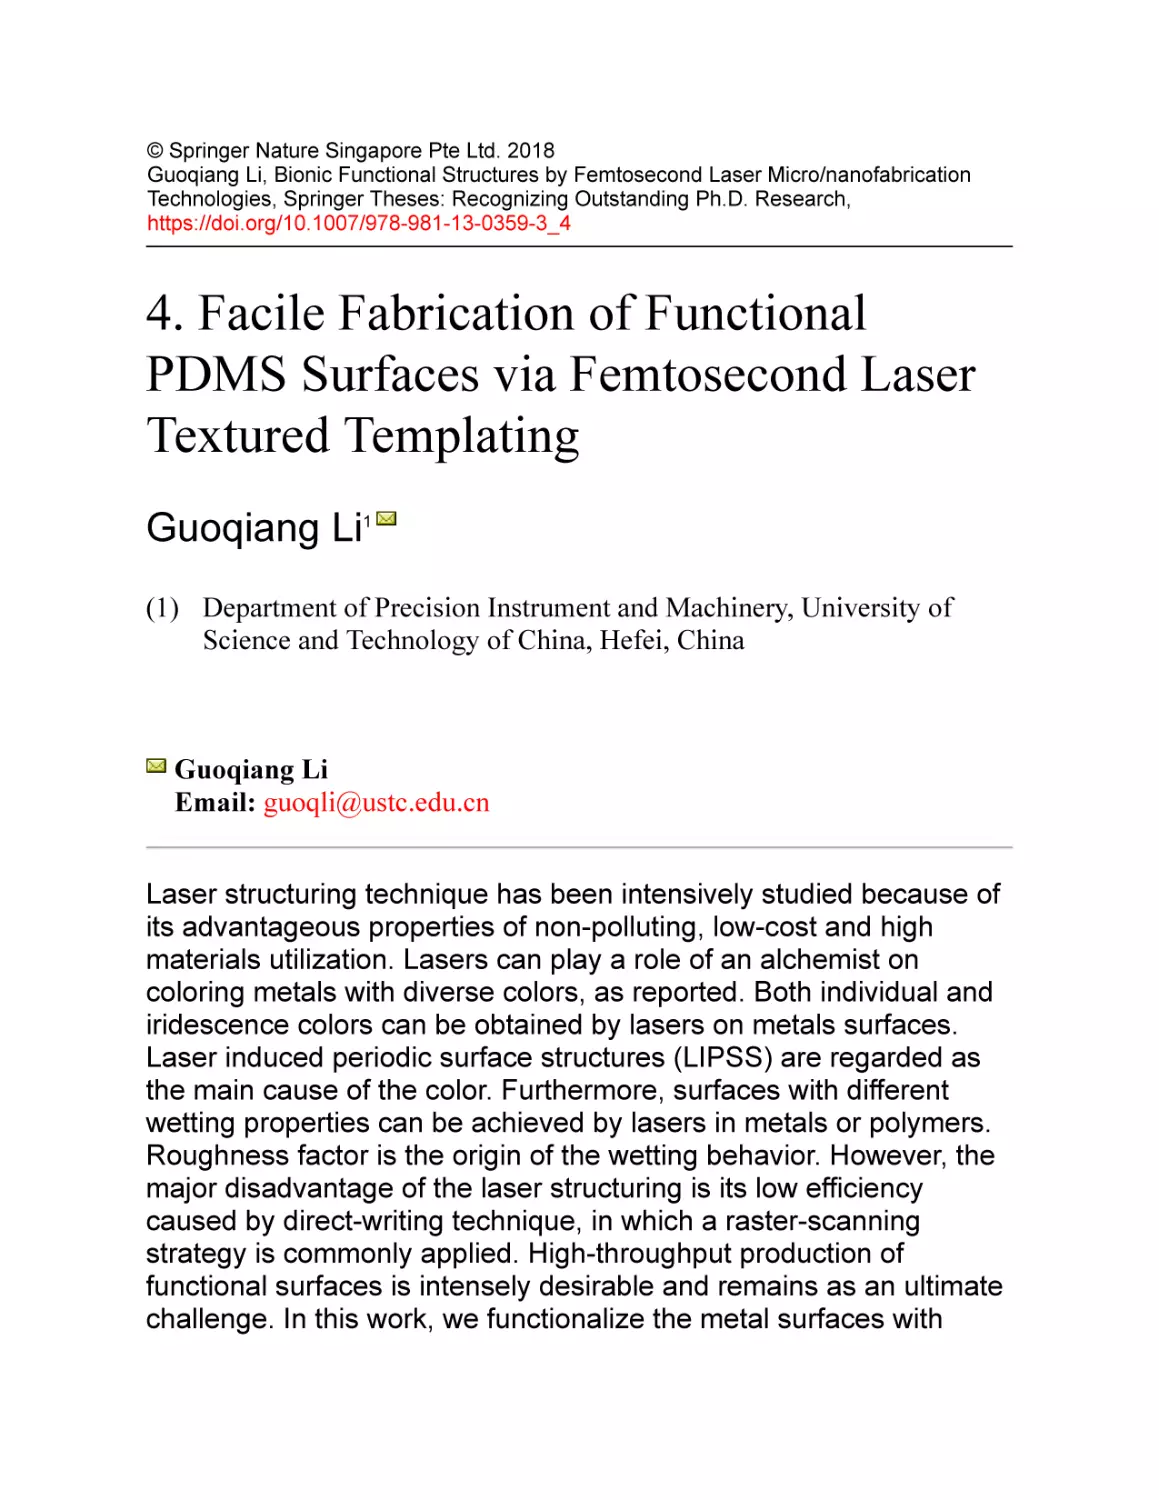 4. Facile Fabrication of Functional PDMS Surfaces via Femtosecond Laser Textured Templating